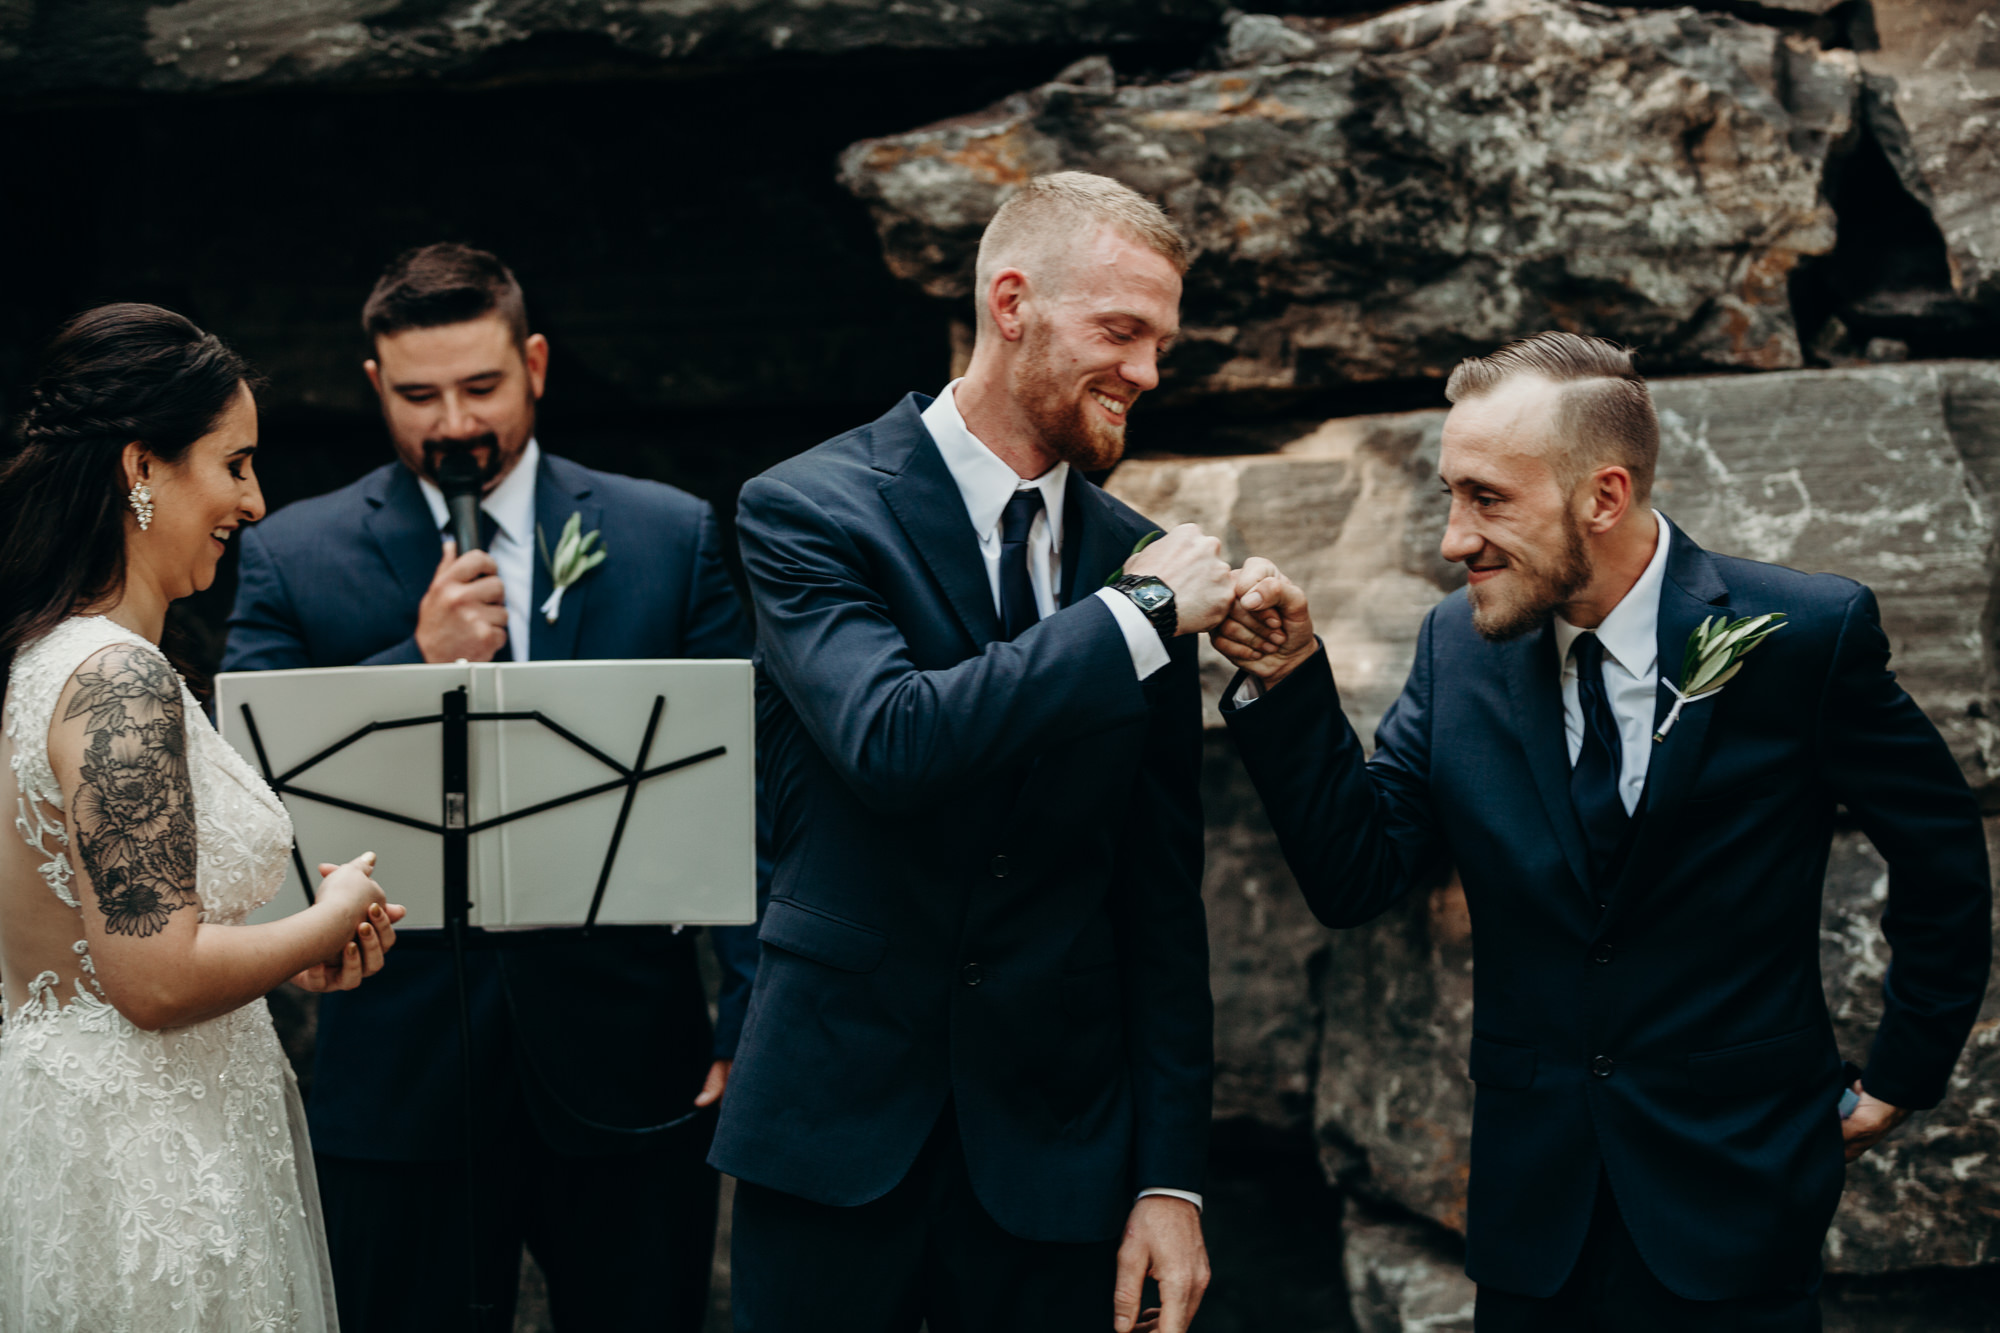 a groom and his best man pound fists at the wedding ceremony at the dibbles inn in syracuse, ny